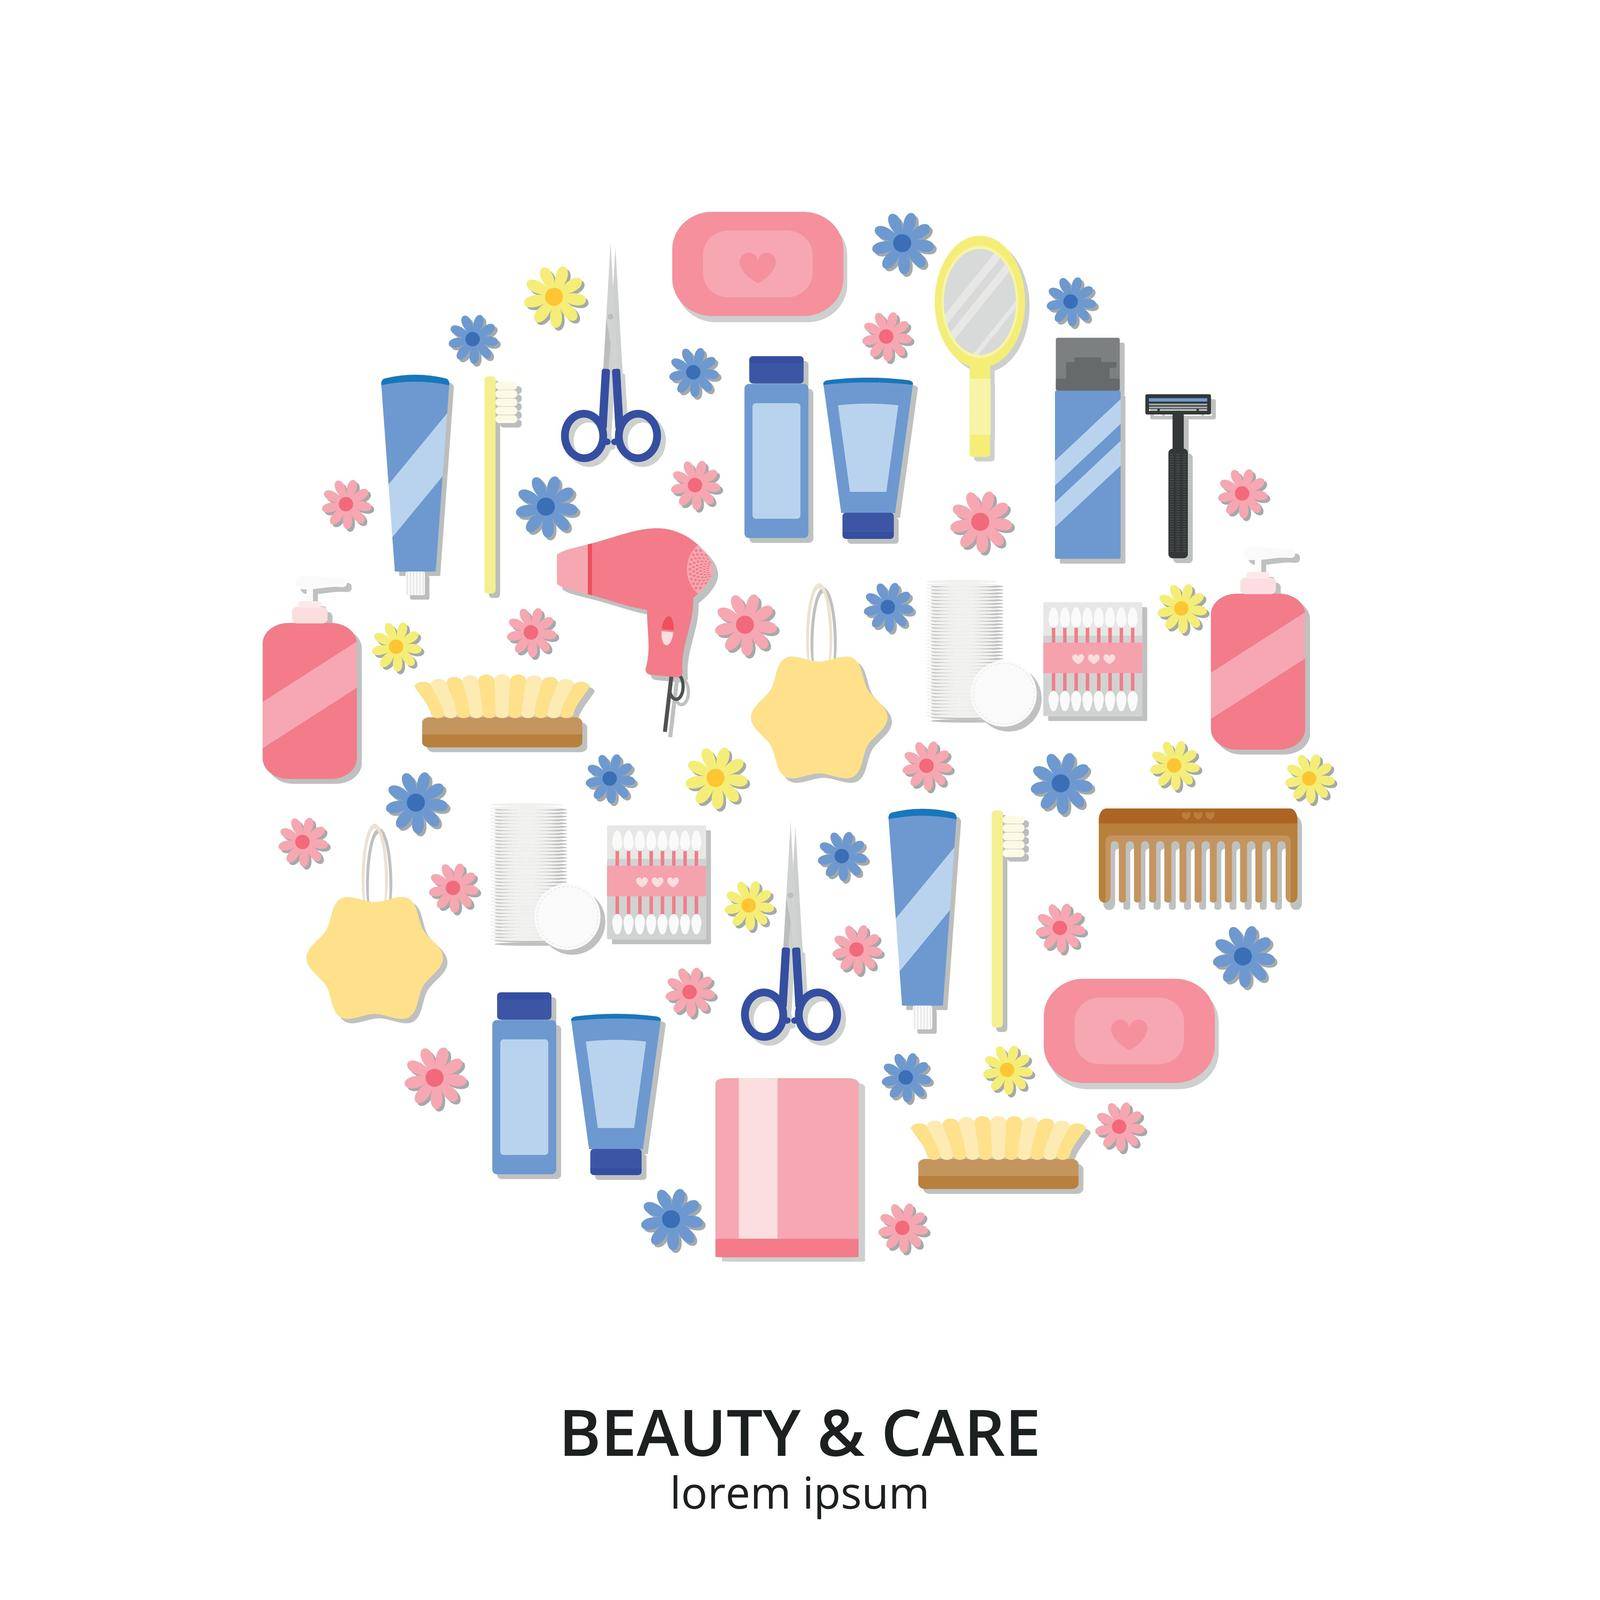 Beauty care, spa and hygiene products icons composed in circle shape. Hygiene and healthcare concept. Vector. Items for body care and hygiene. Flat beauty icons in circle on white background.